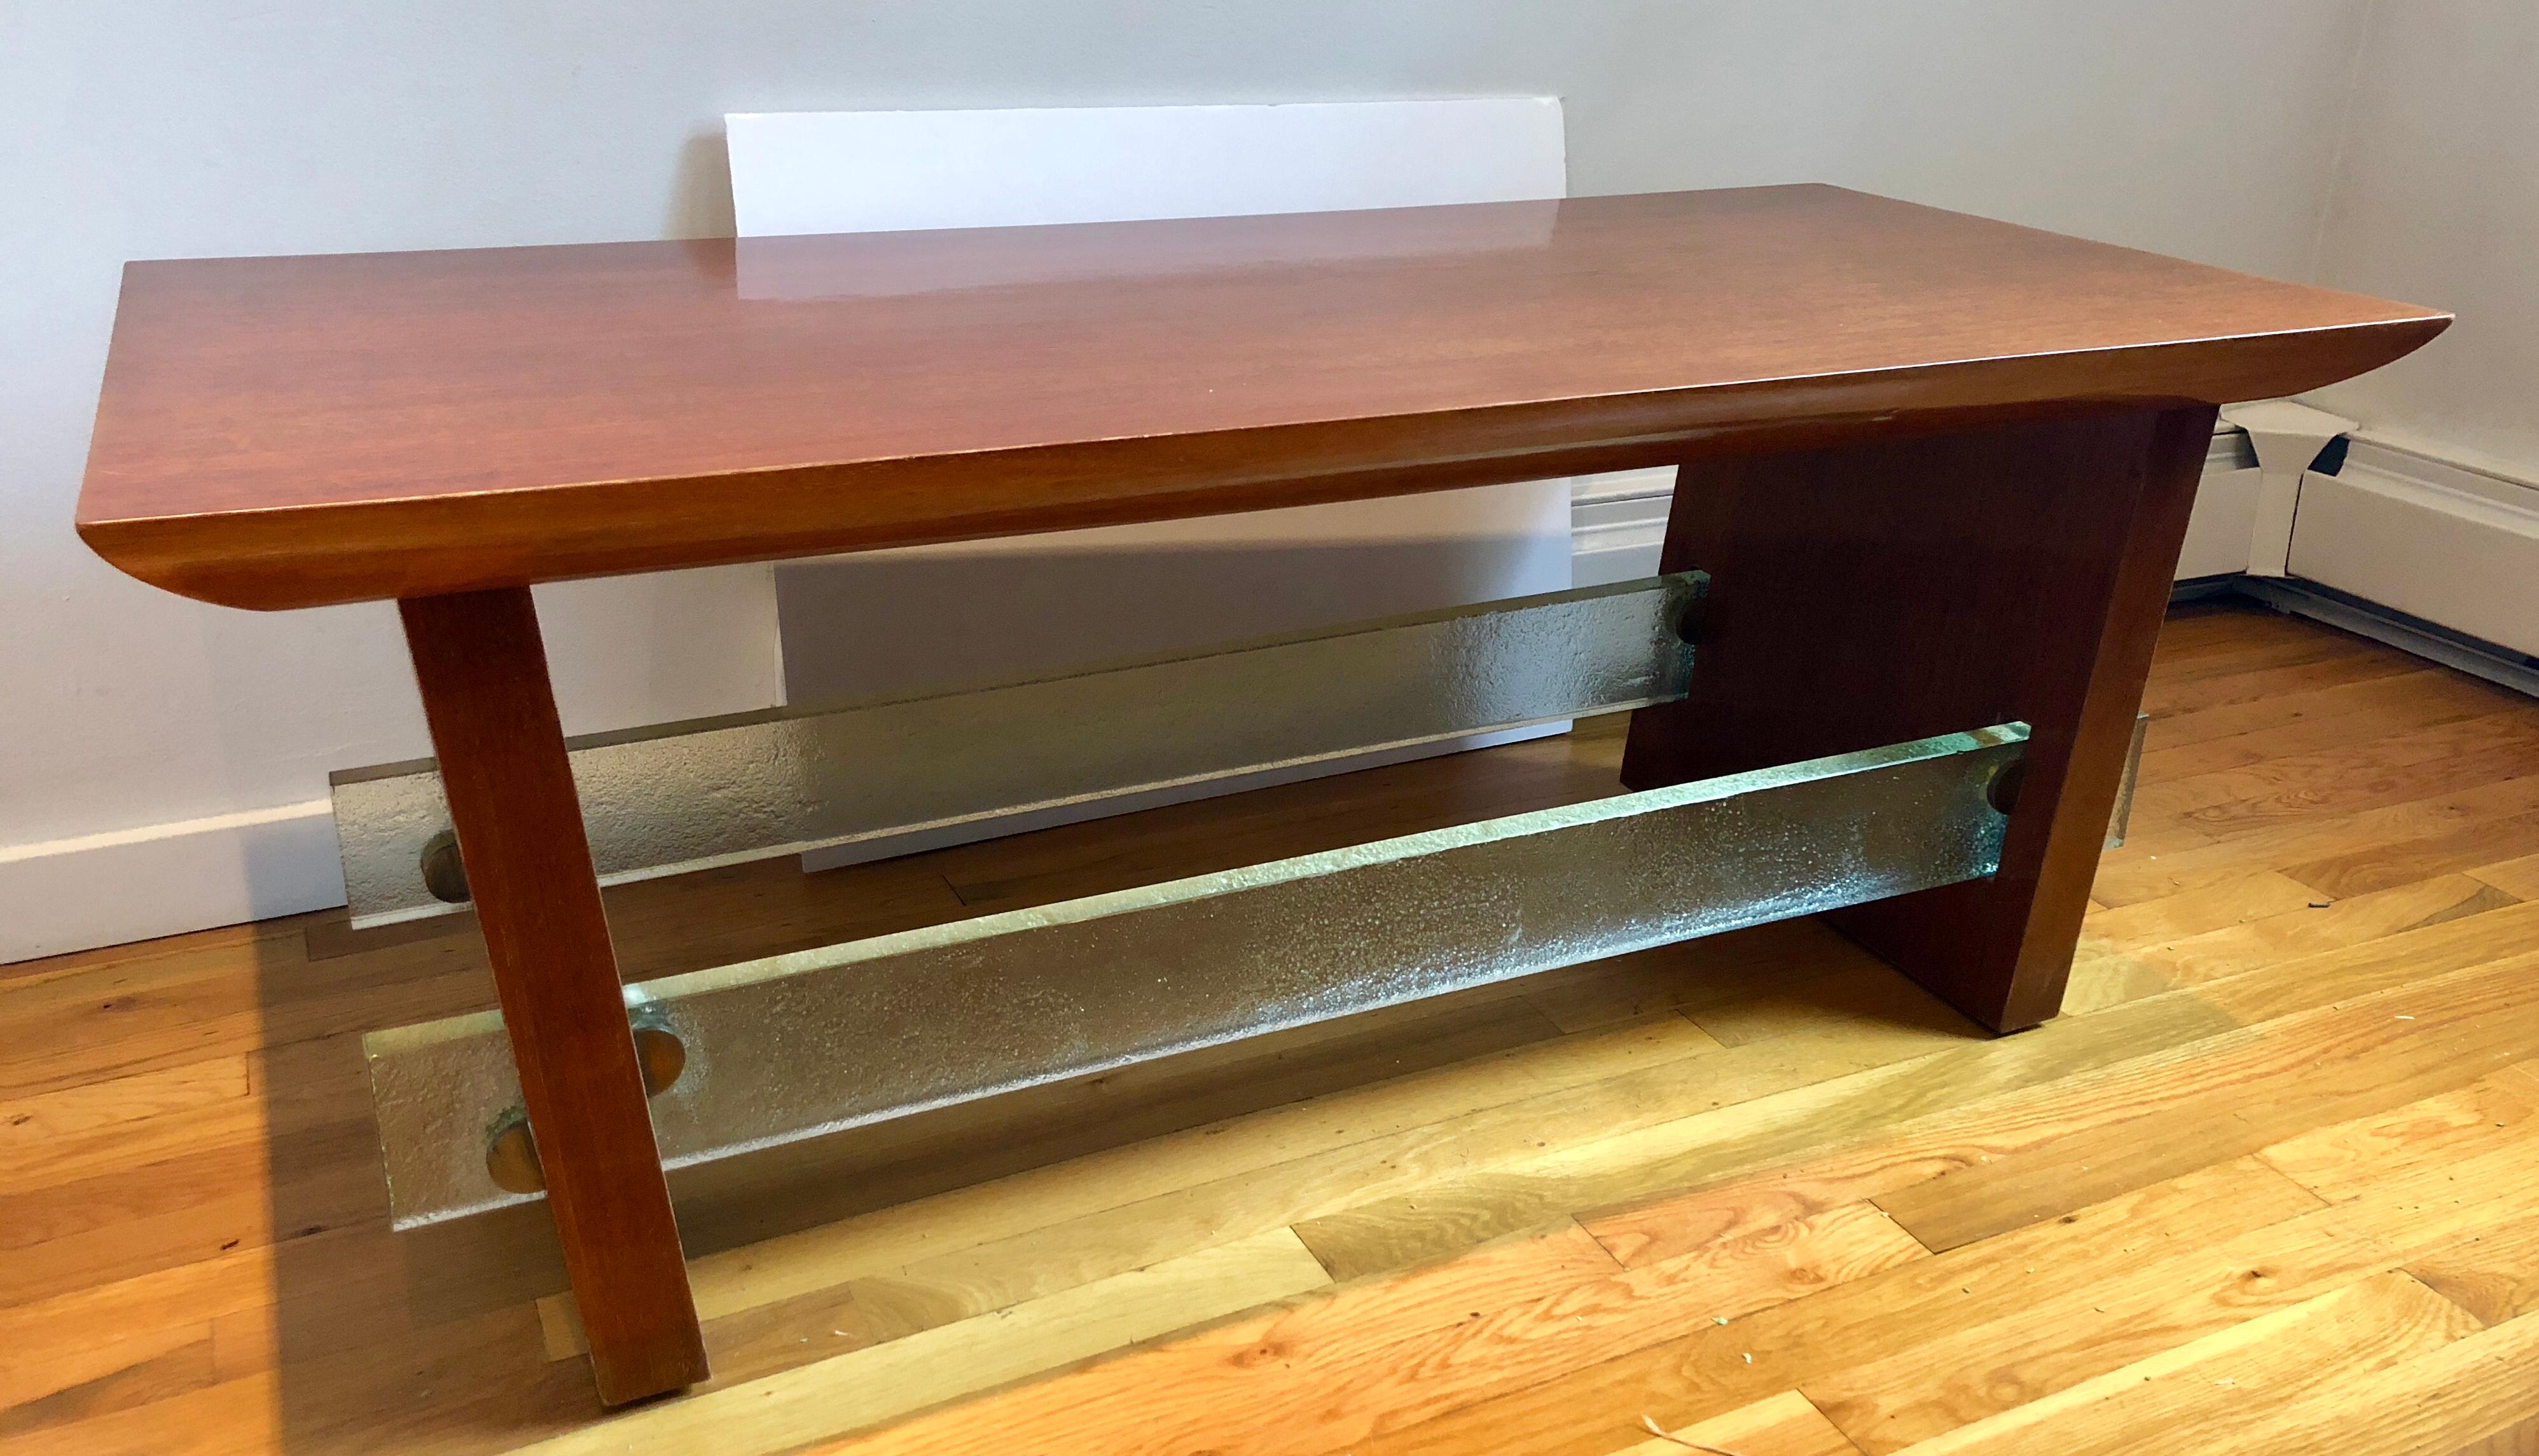 Interesting circa 1940s French modernist design employing the high/low mix strongly associated with the designs of Jacques Adnet in this period. Chunky, almost rustic slab mahogany veneered top and slightly angled trestle legs, joined by 1” thick